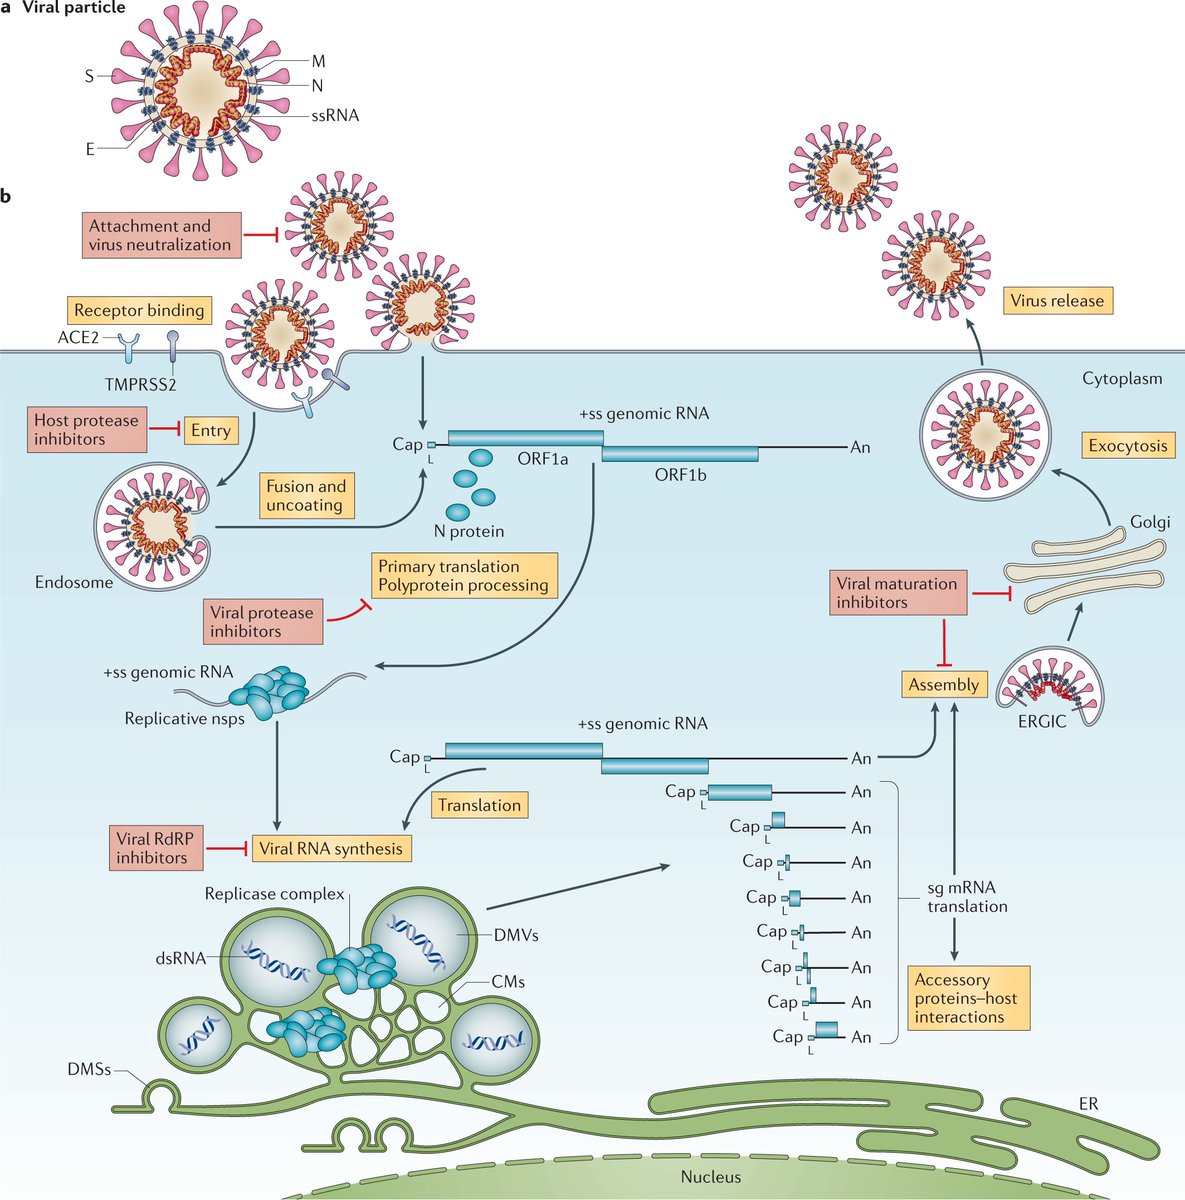 Nature Reviews Microbiology on Twitter: "Coronavirus biology and replication: implications for SARS-CoV-2 https://t.co/Sifk9ga9Fo In this Review, Thiel and colleagues discuss the key aspects coronavirus biology and their implications for SARS-CoV-2 ...